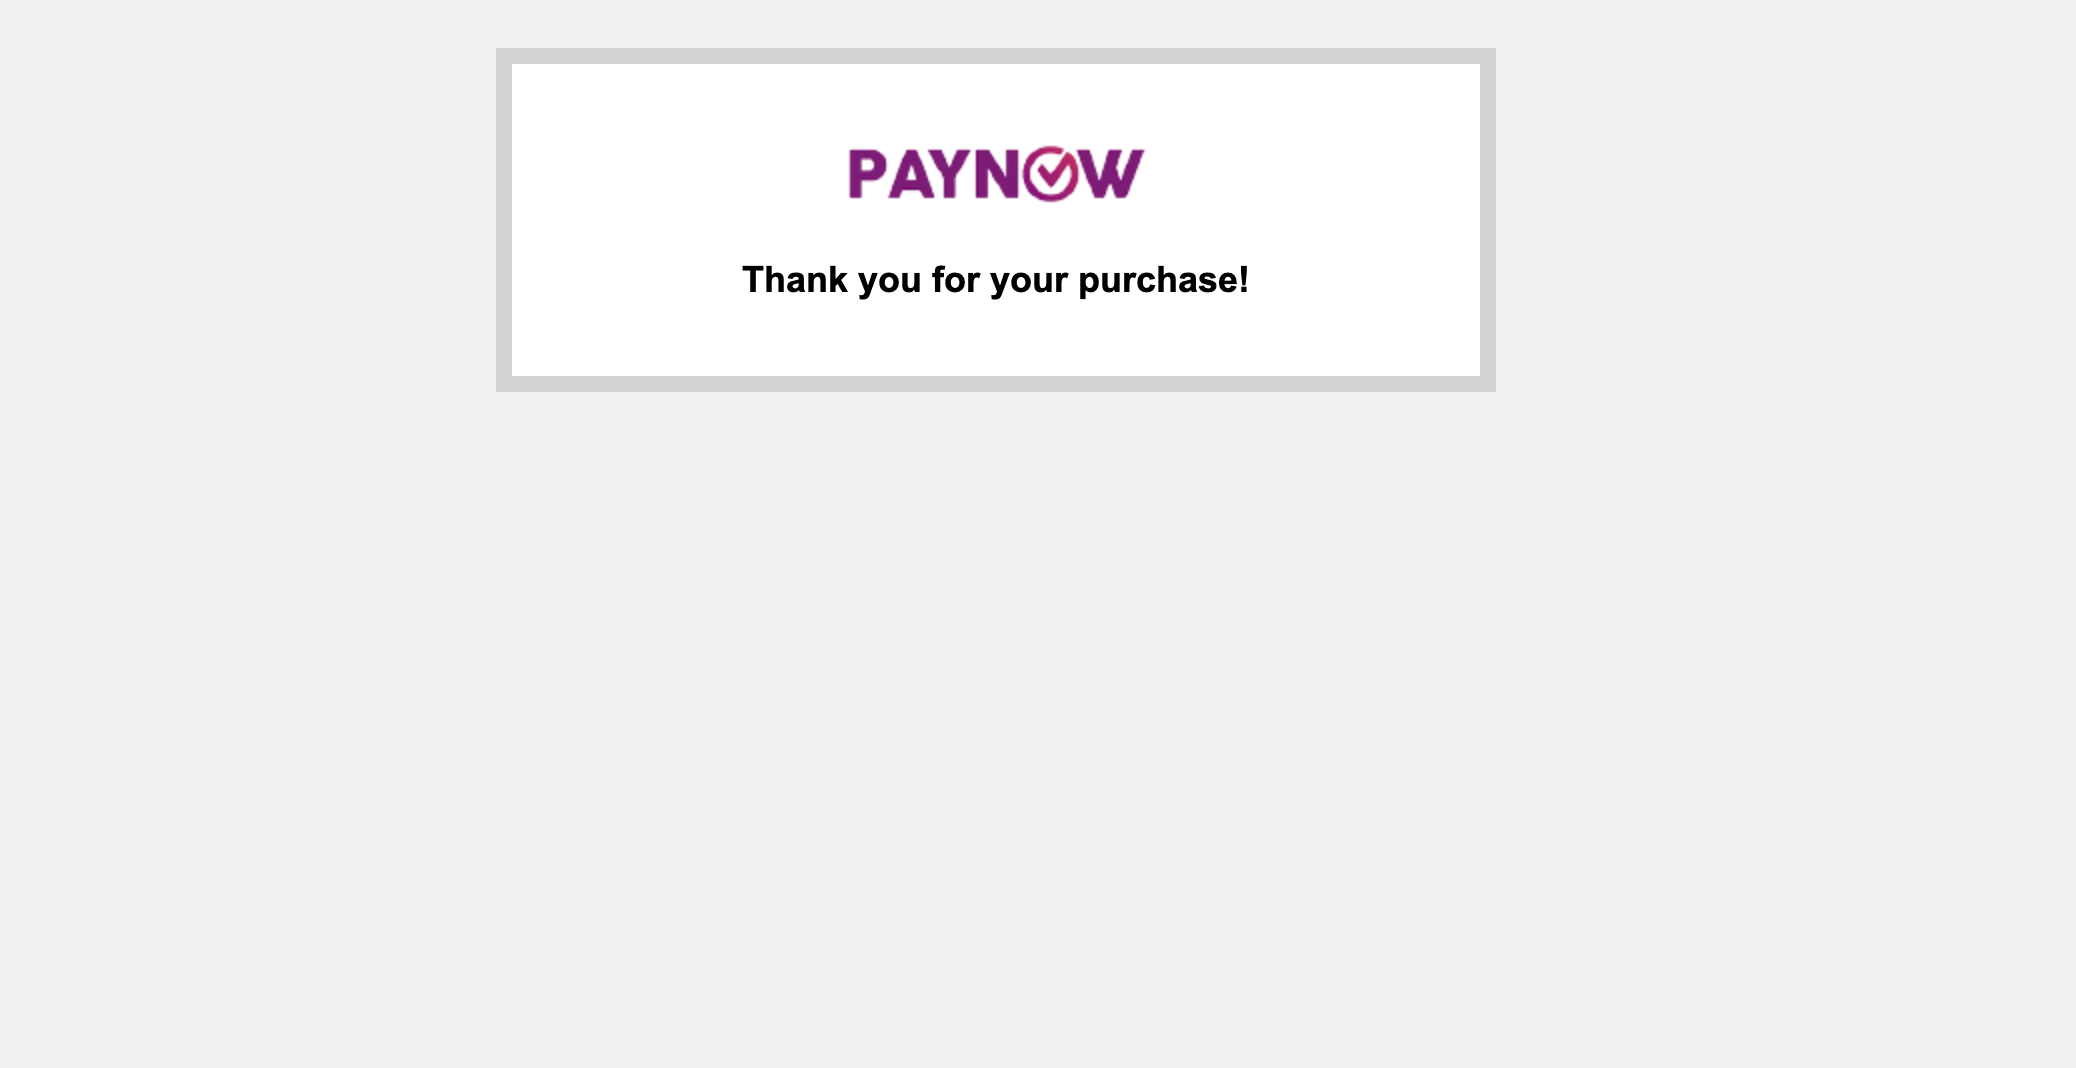 PayNow successful page